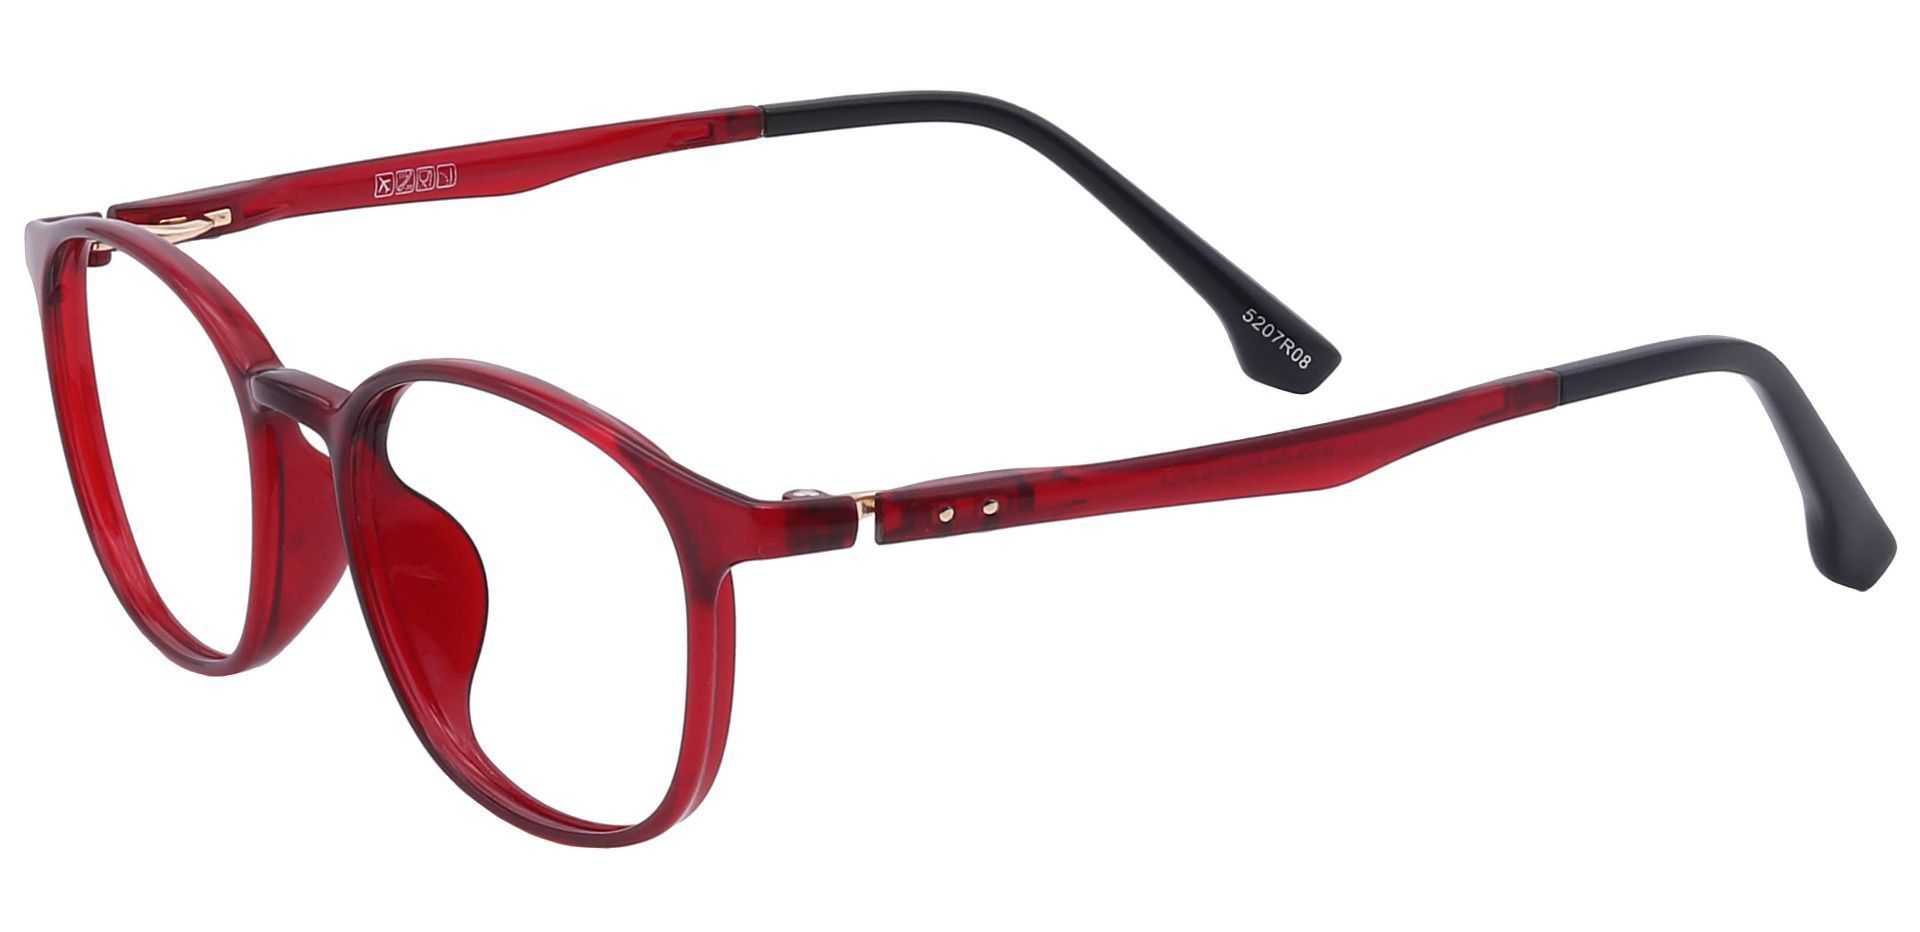 Shannon Oval Non-Rx Glasses - Red